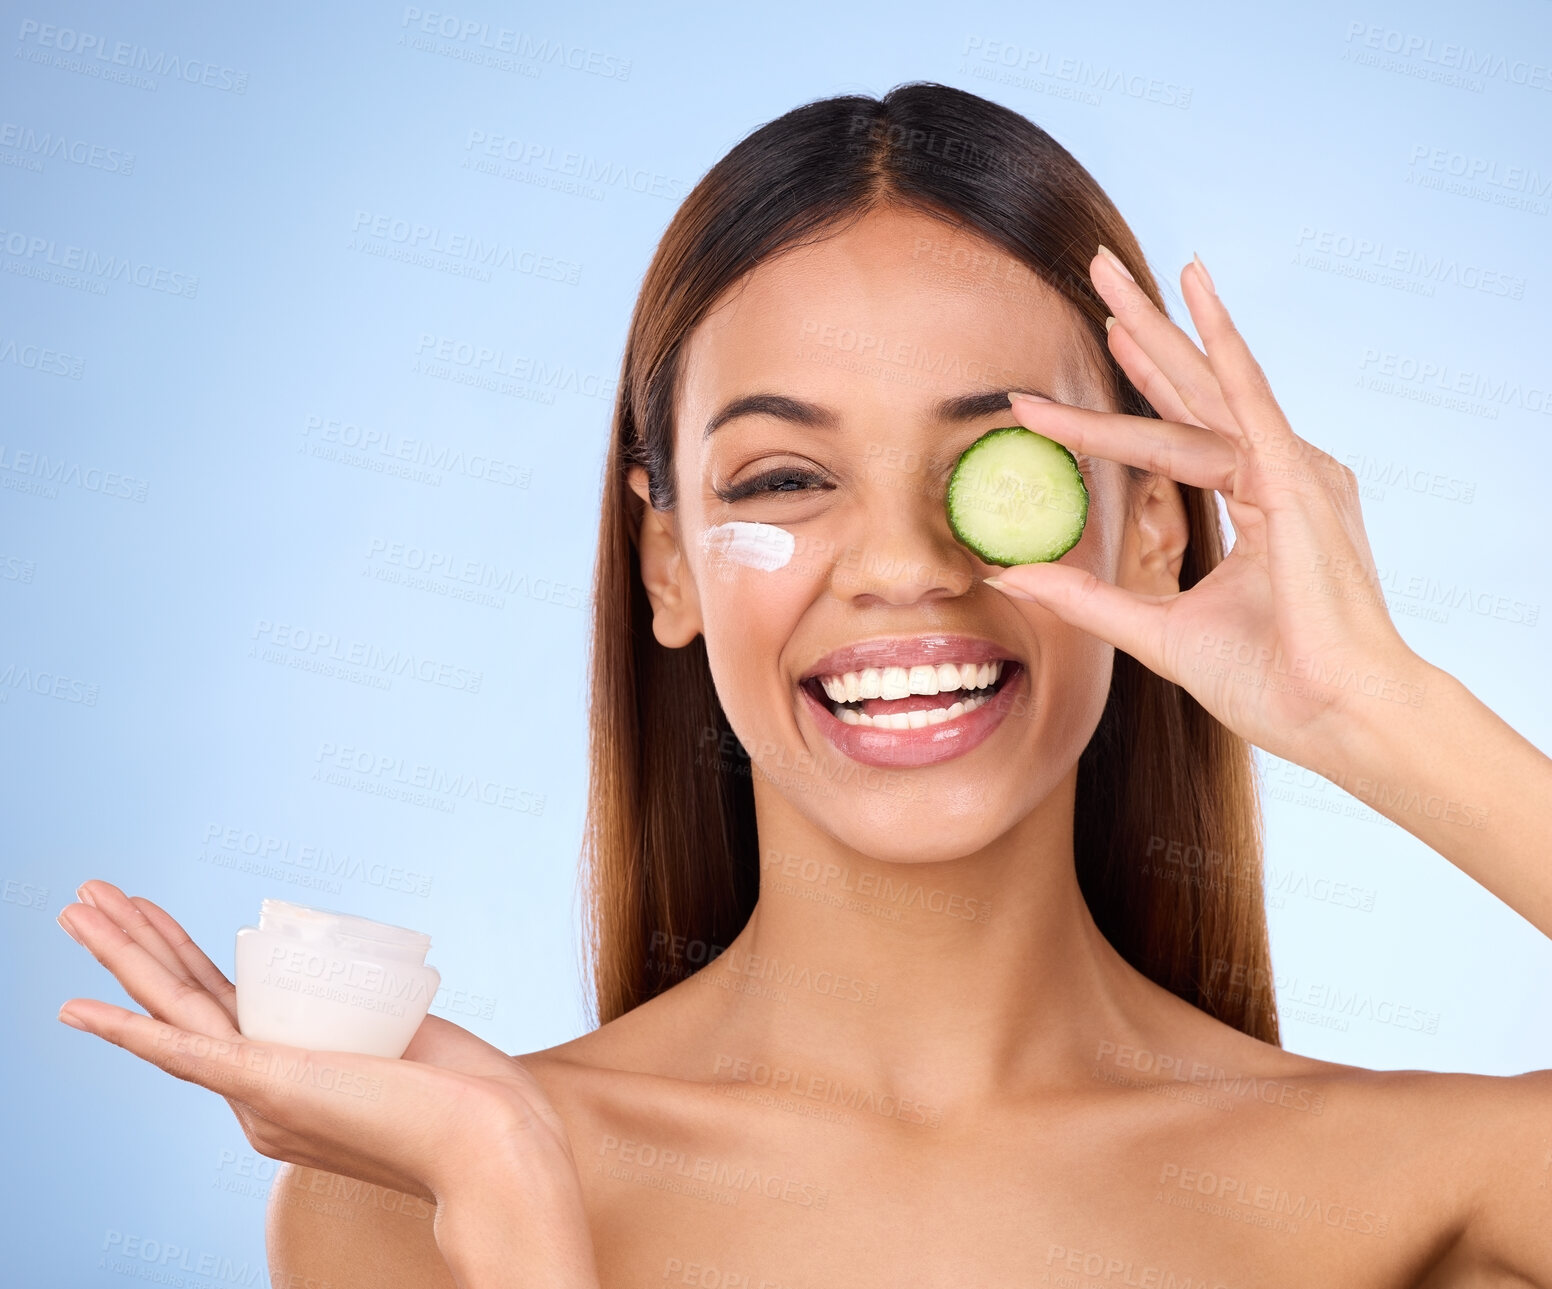 Buy stock photo Woman, moisturizer cream and cucumber for natural skincare, beauty and cosmetics against blue studio background. Portrait of happy female holding vegetable, creme or lotion for healthy organic facial